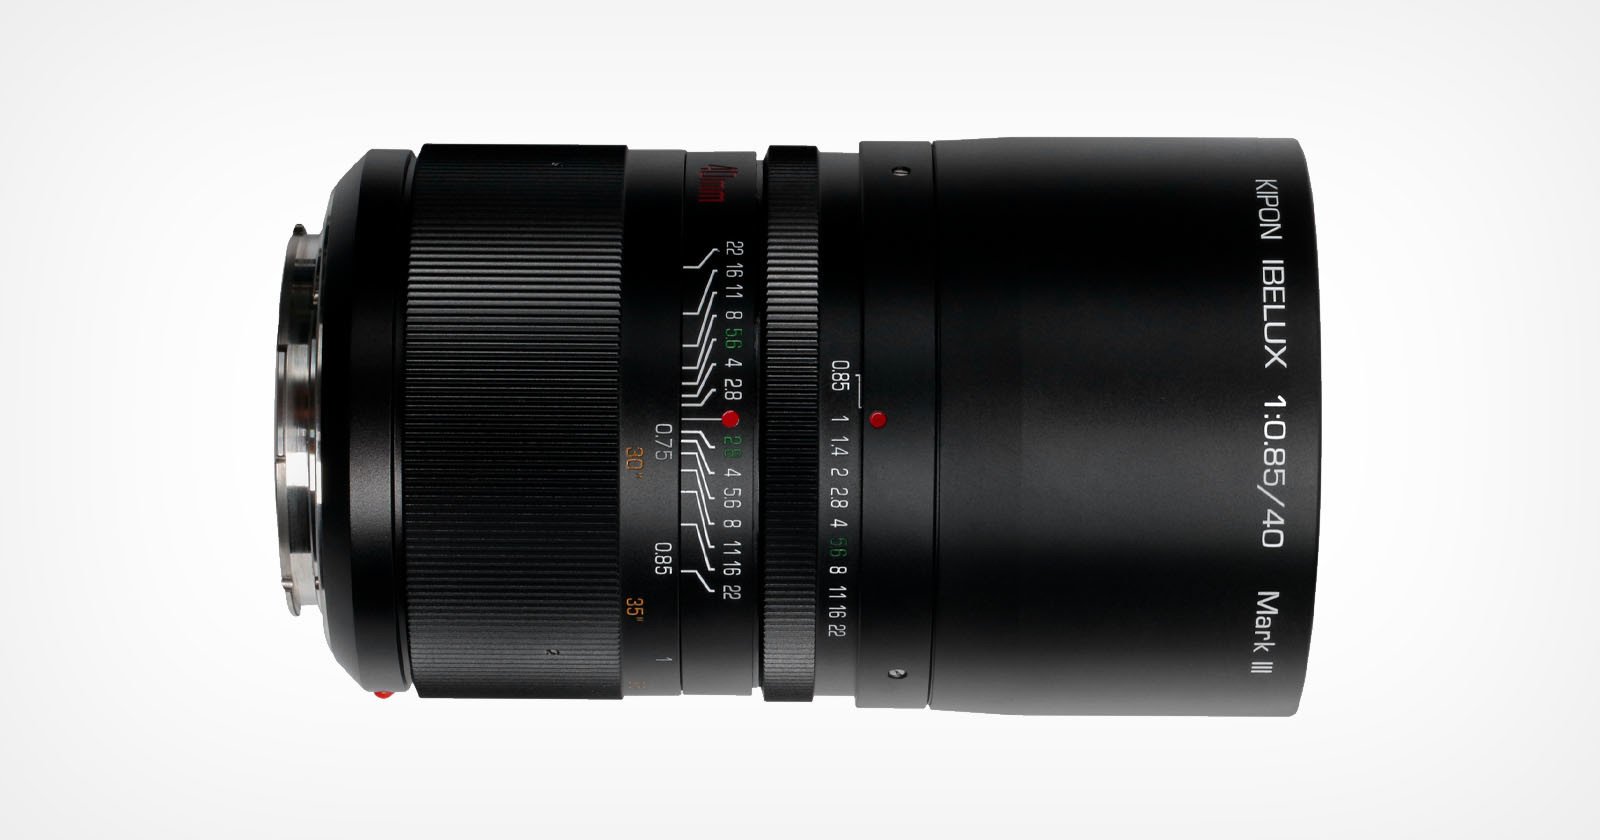 Kipons Third-Gen 40mm f/0.85 Lens is Available for Six Camera Mounts